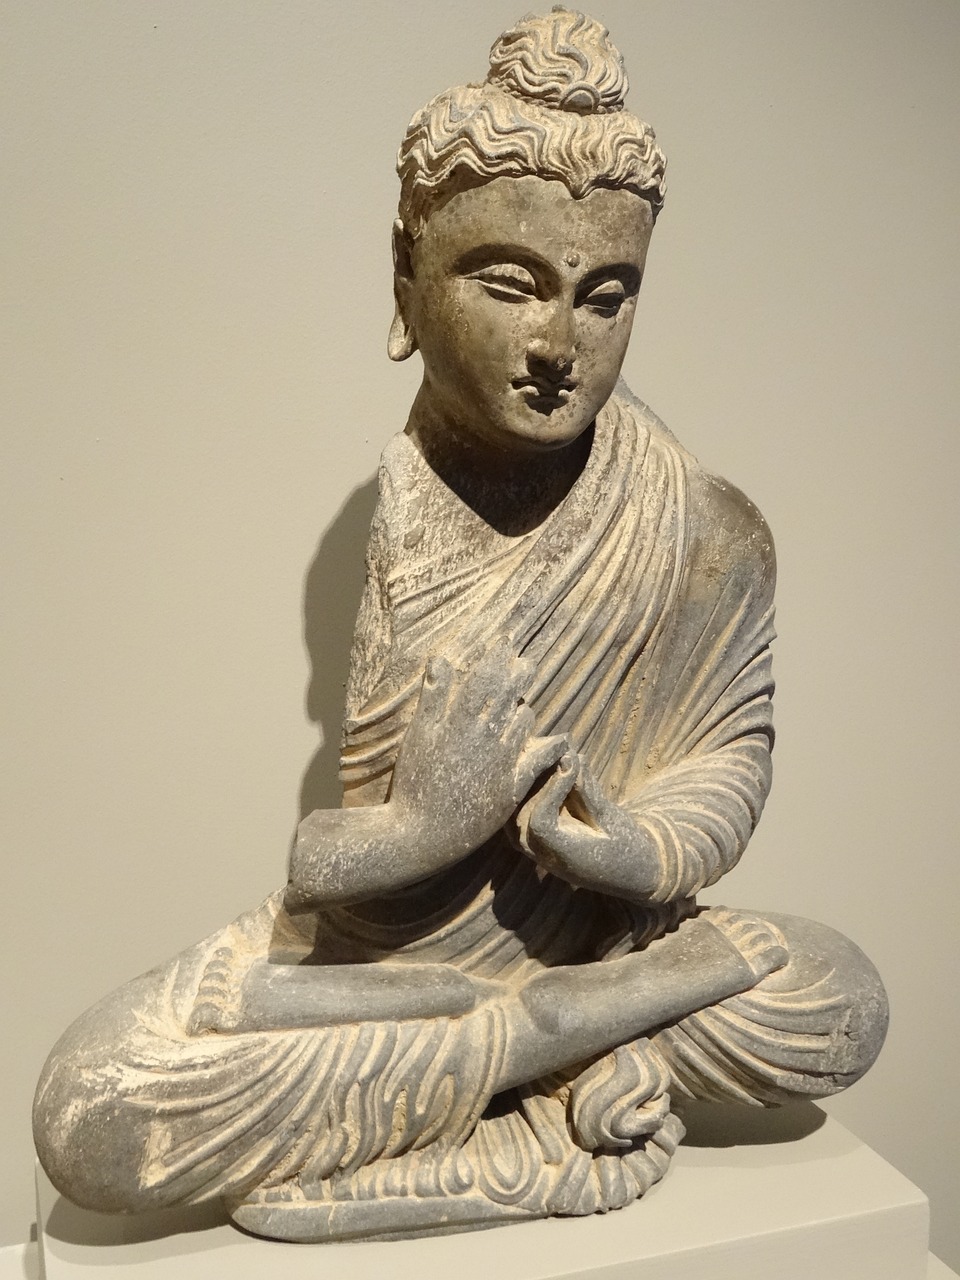 a statue of a person sitting in a meditation position, inspired by Li Di, flickr, classical antiquities on display, moma, 1 4 8 0 s, peaceful and graceful